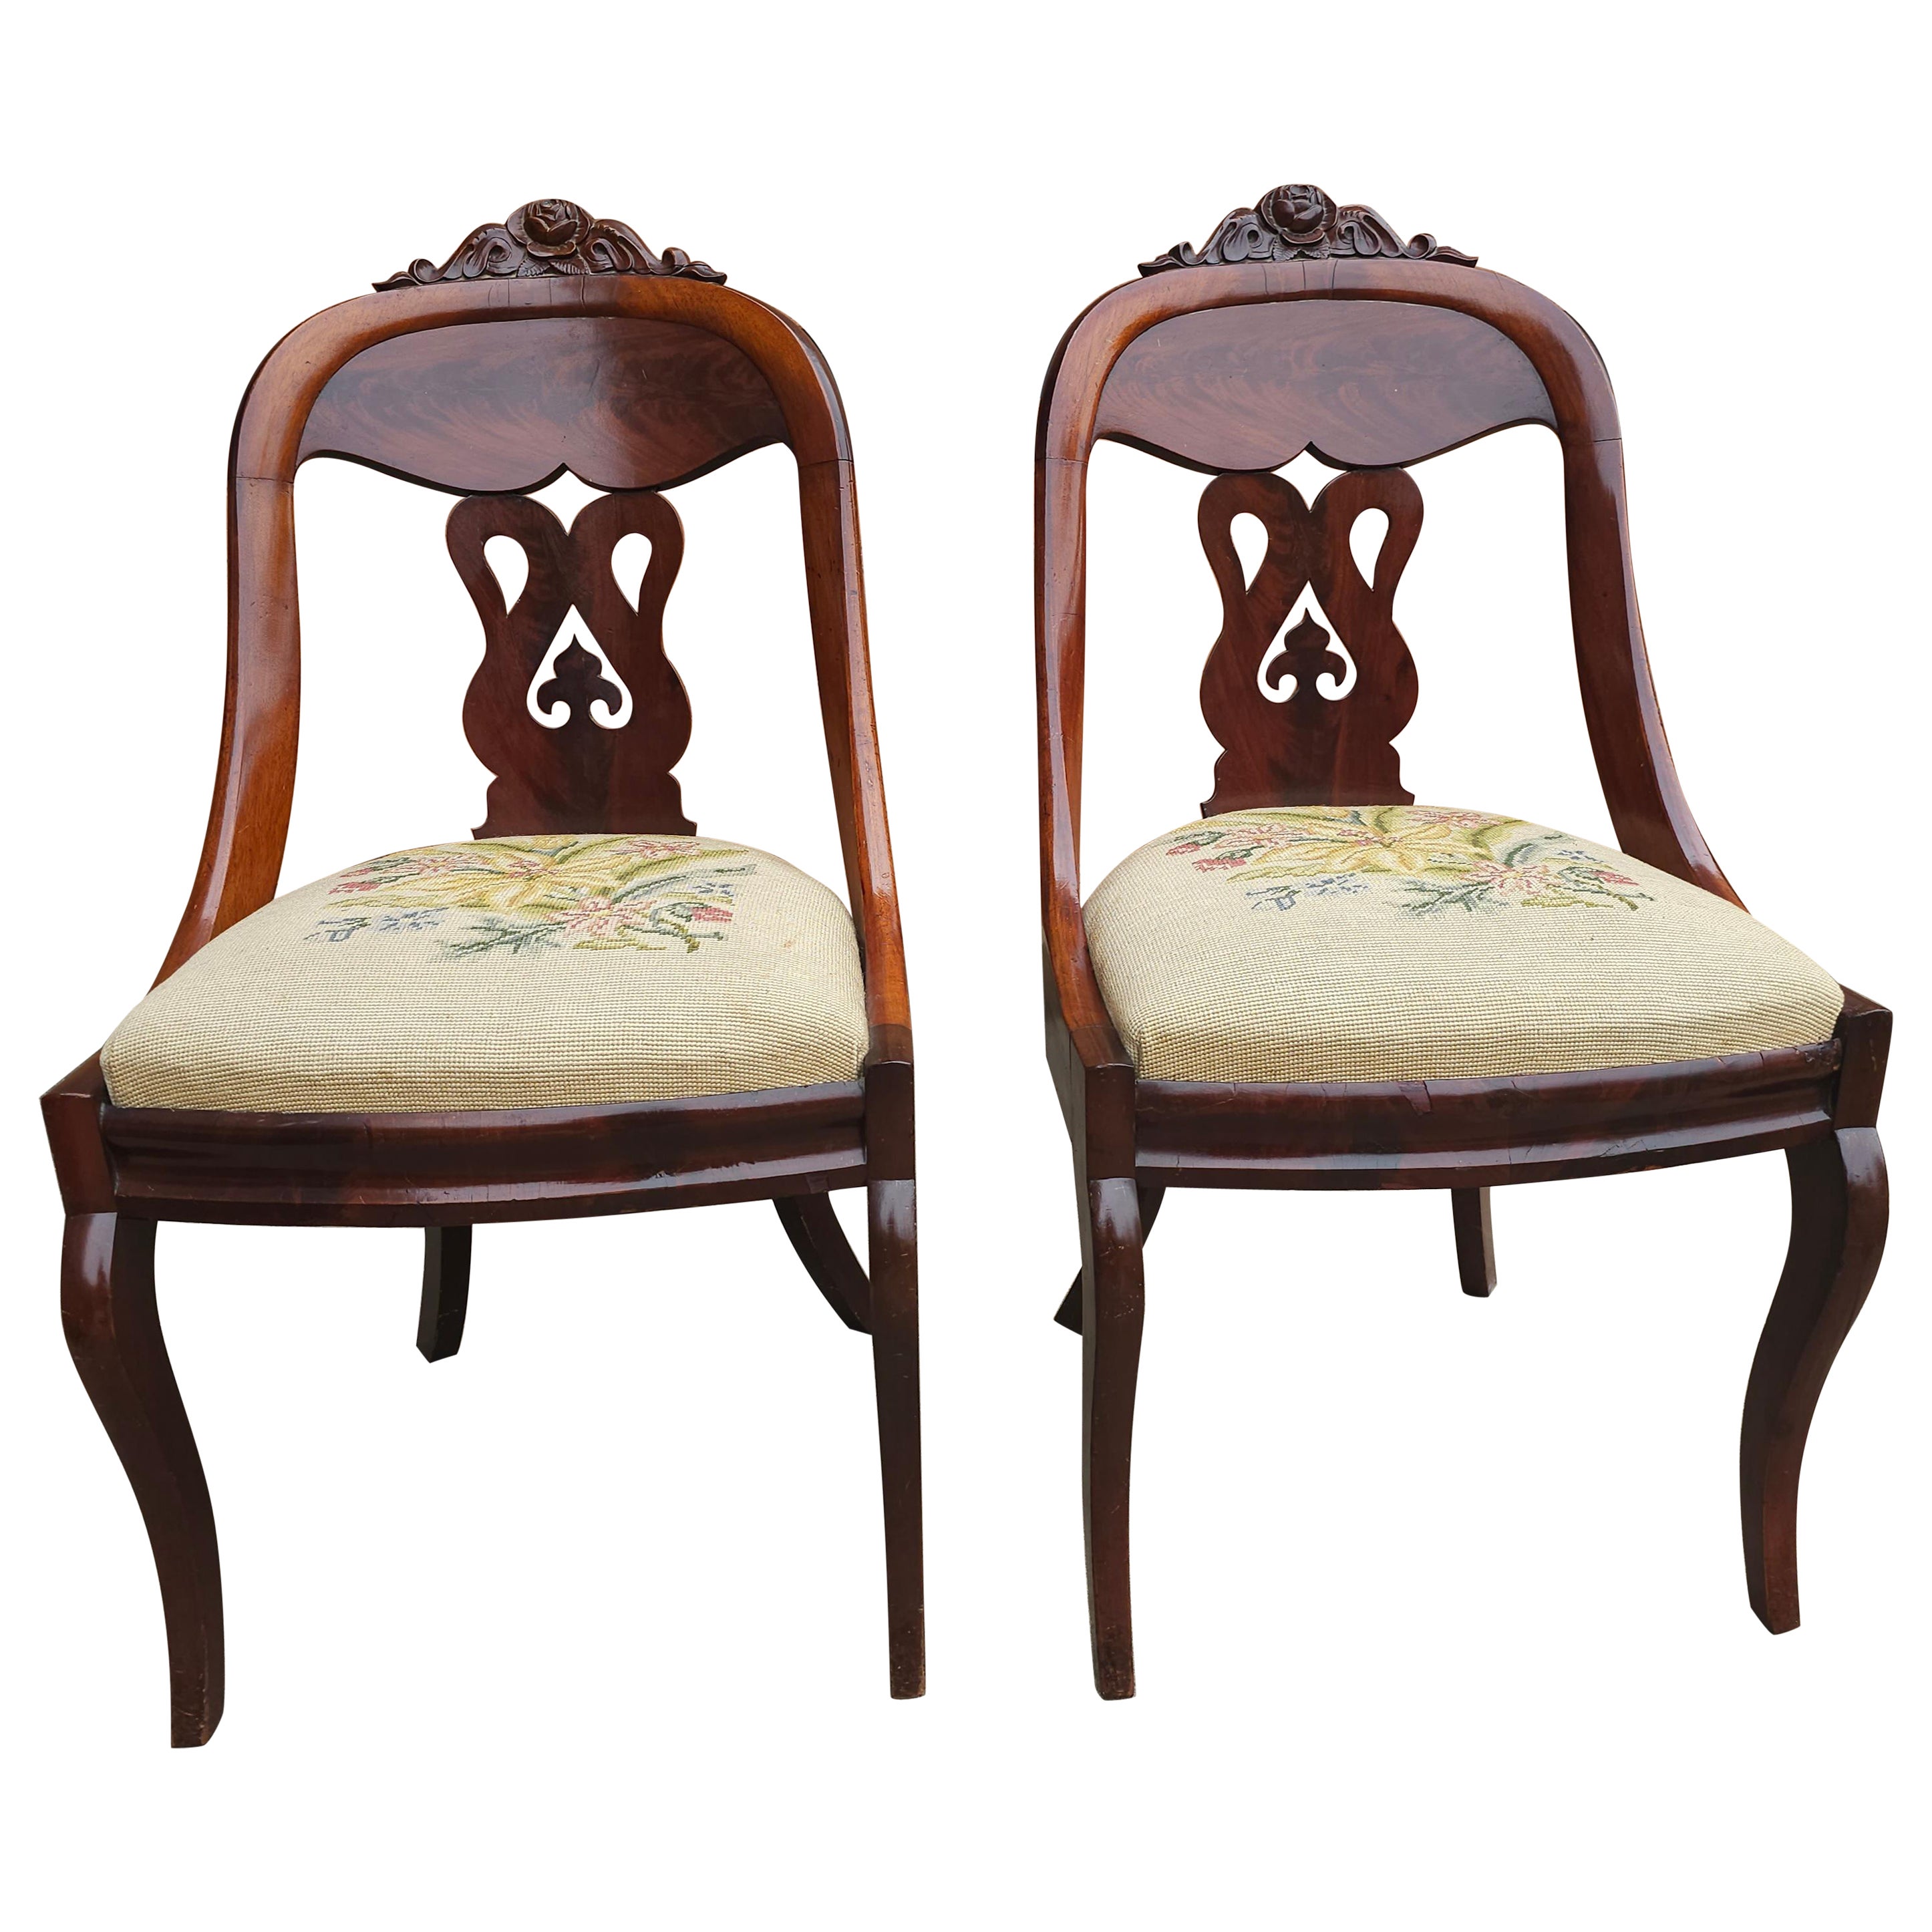 Pair 19th C. American Empire Carved Magogany and Upholstered Chairs